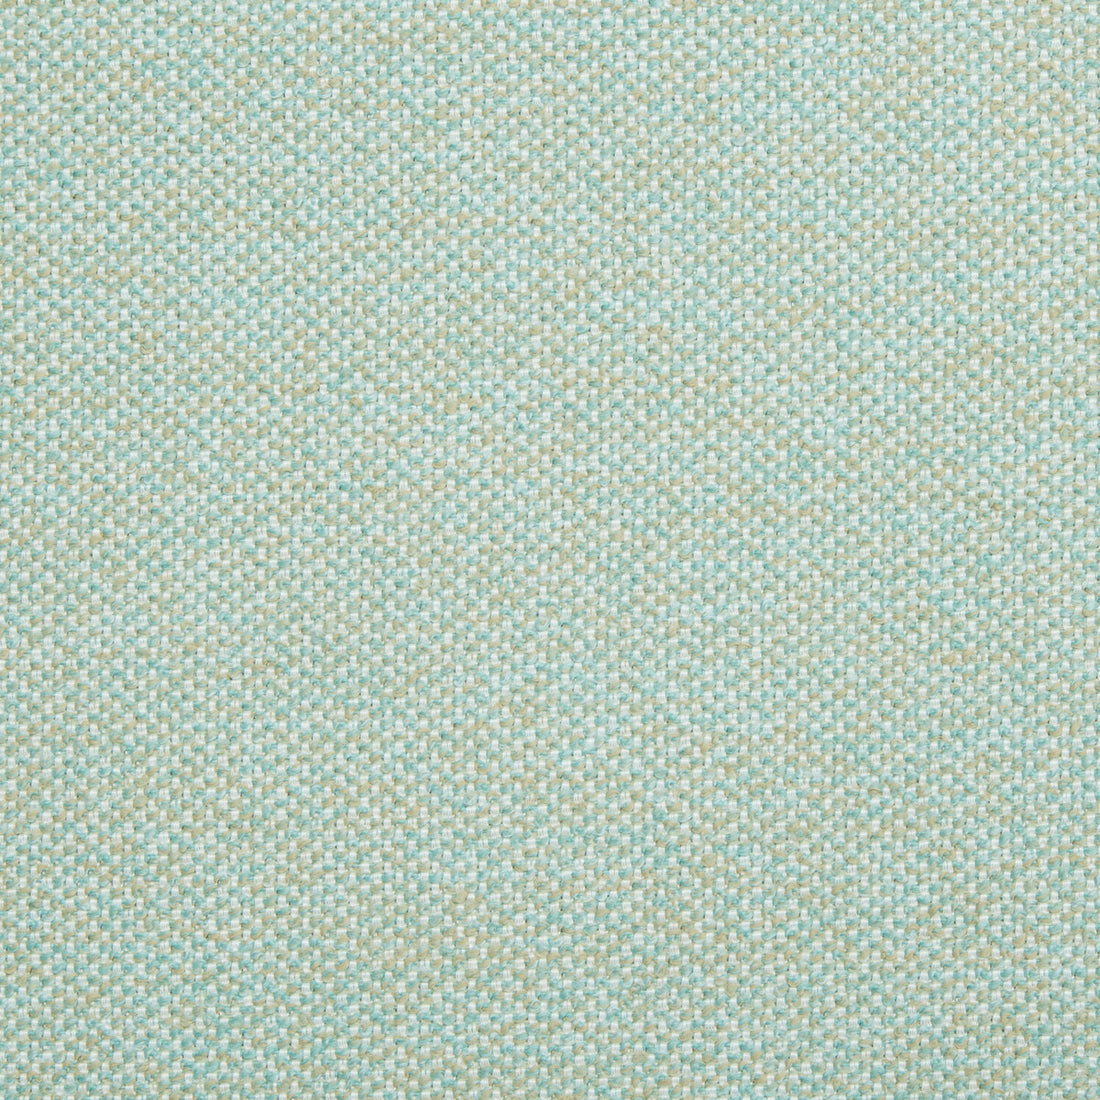 Shoal Boucle fabric in surf color - pattern 34545.1613.0 - by Kravet Design in the Echo Indoor Outdoor Ibiza collection